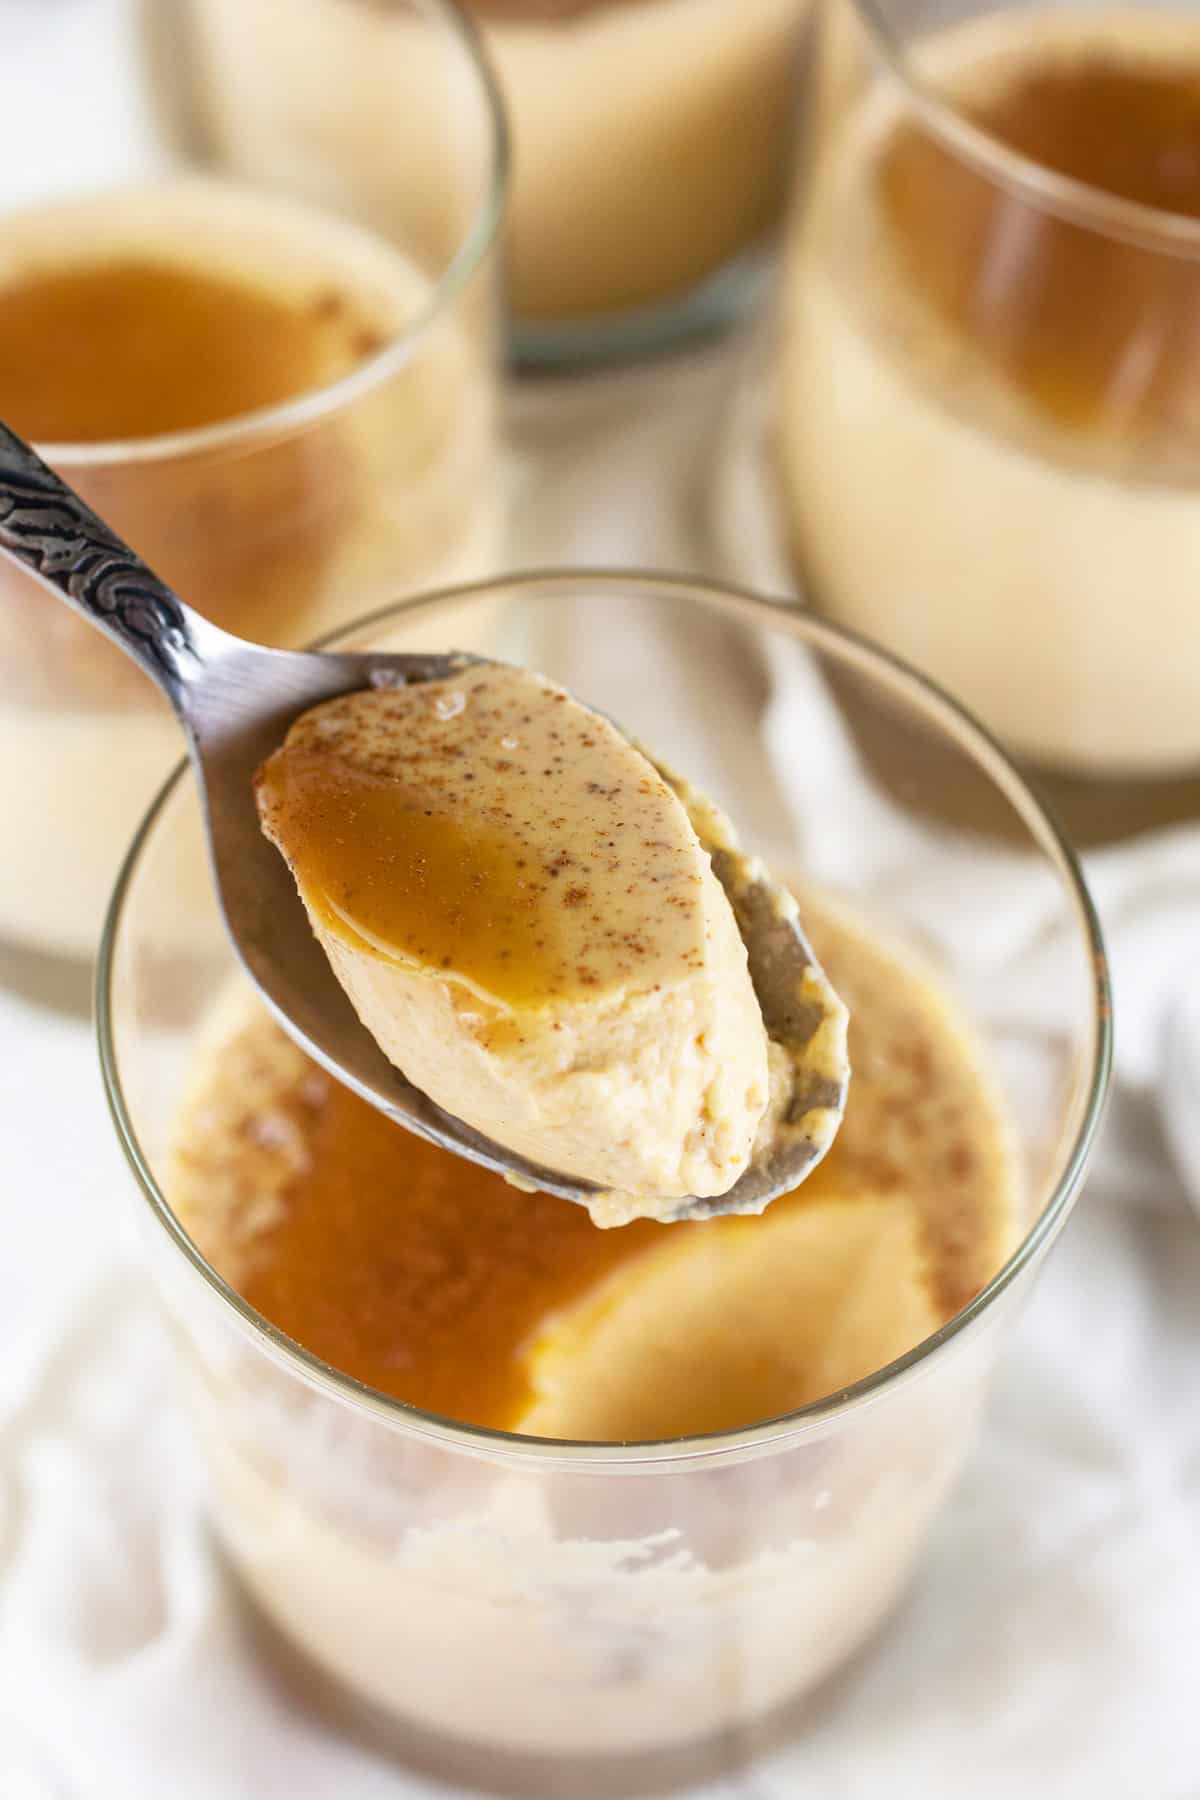 Spoonful of pumpkin panna cotta with caramel sauce lifted from glass.